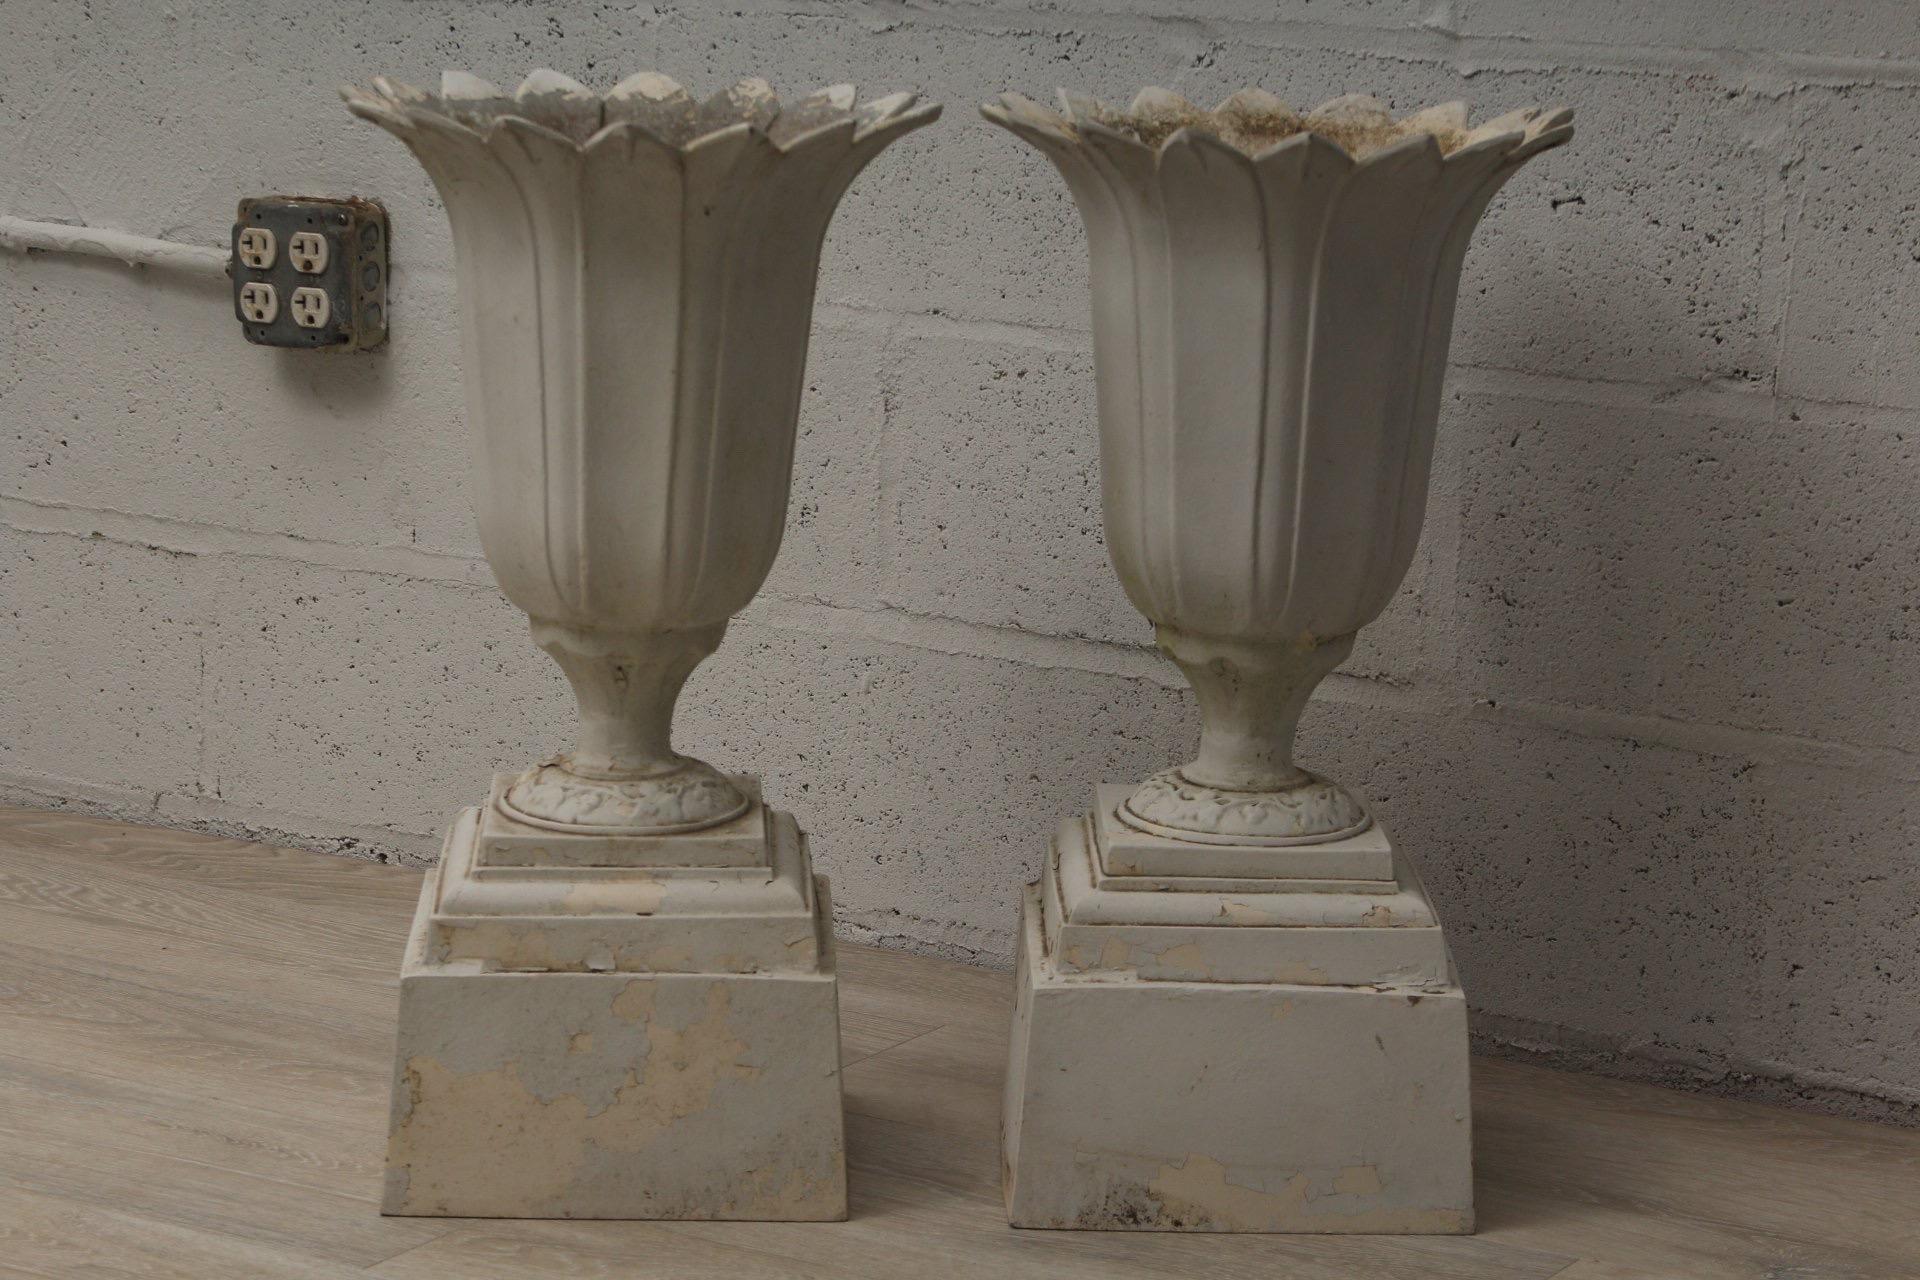 Pair of vintage aluminum urn planters in white. 

Imported, circa 1980-1990.

Dimensions: 28